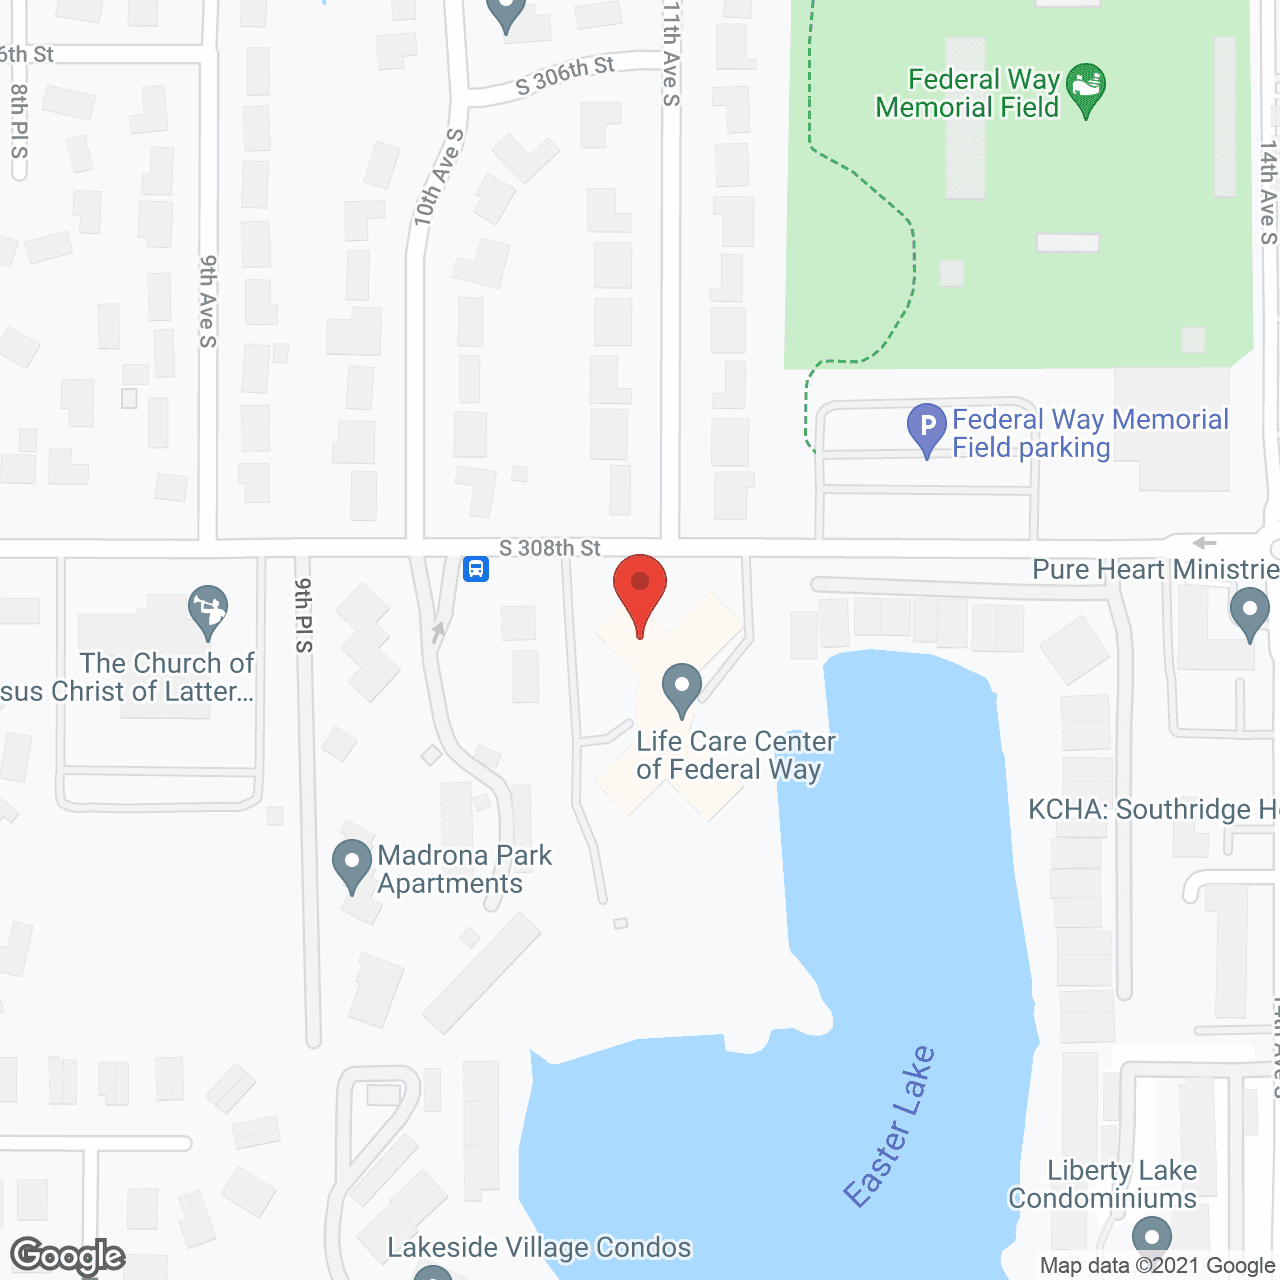 Life Care Center of Federal Way in google map